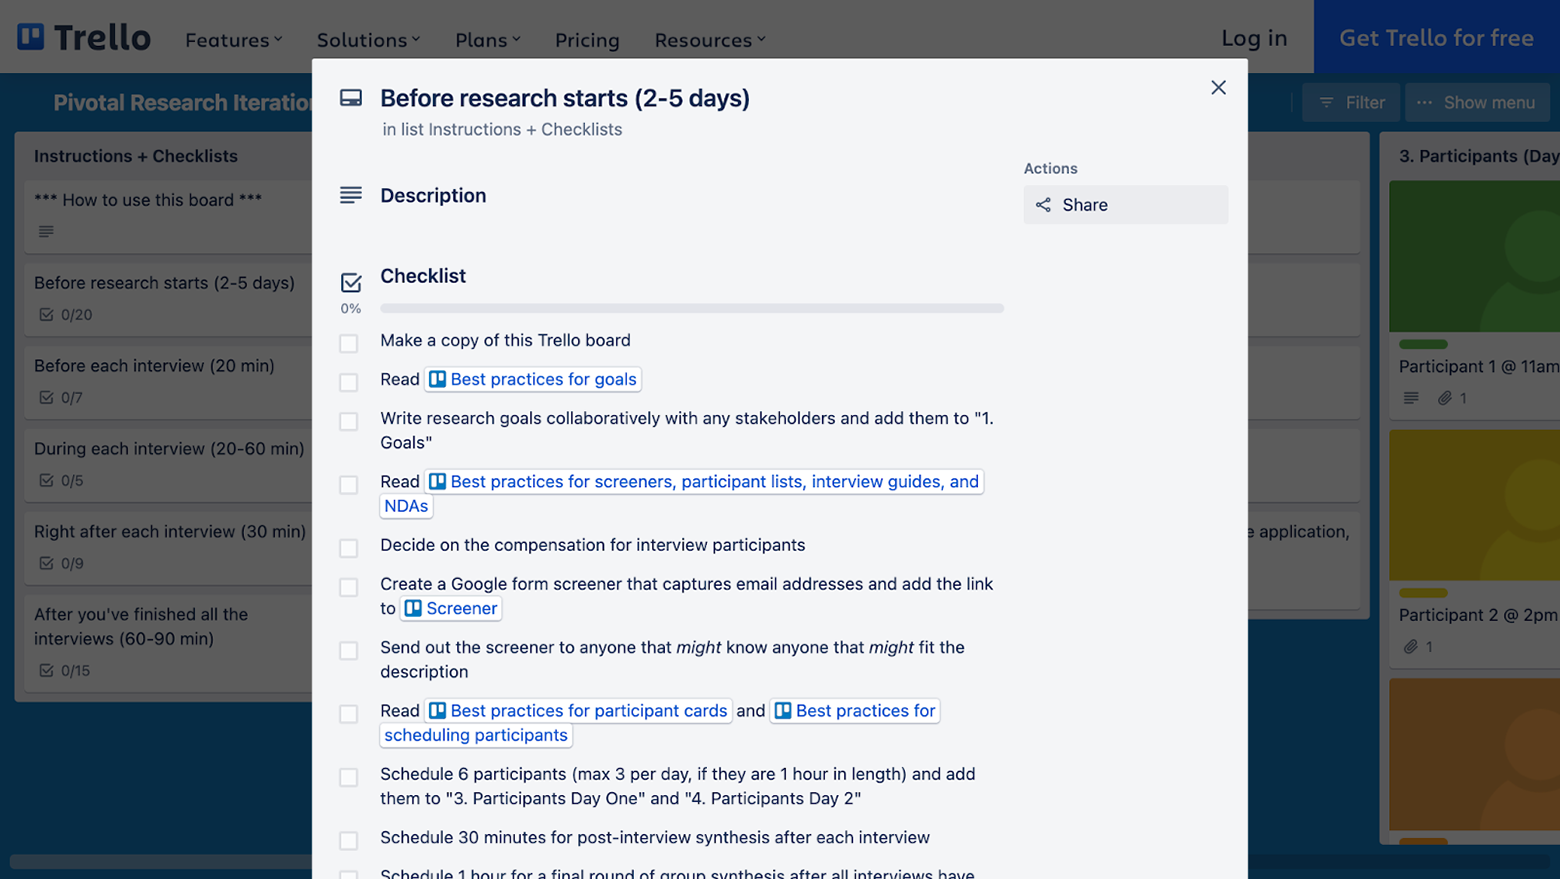 A checklist in Trello prepares team members for their research project. Items on the list include âRead best practices for goals,â âDecide on the compensation for interview participants,â and âSchedule 30 minutes for post-interview synthesis after each interview.â